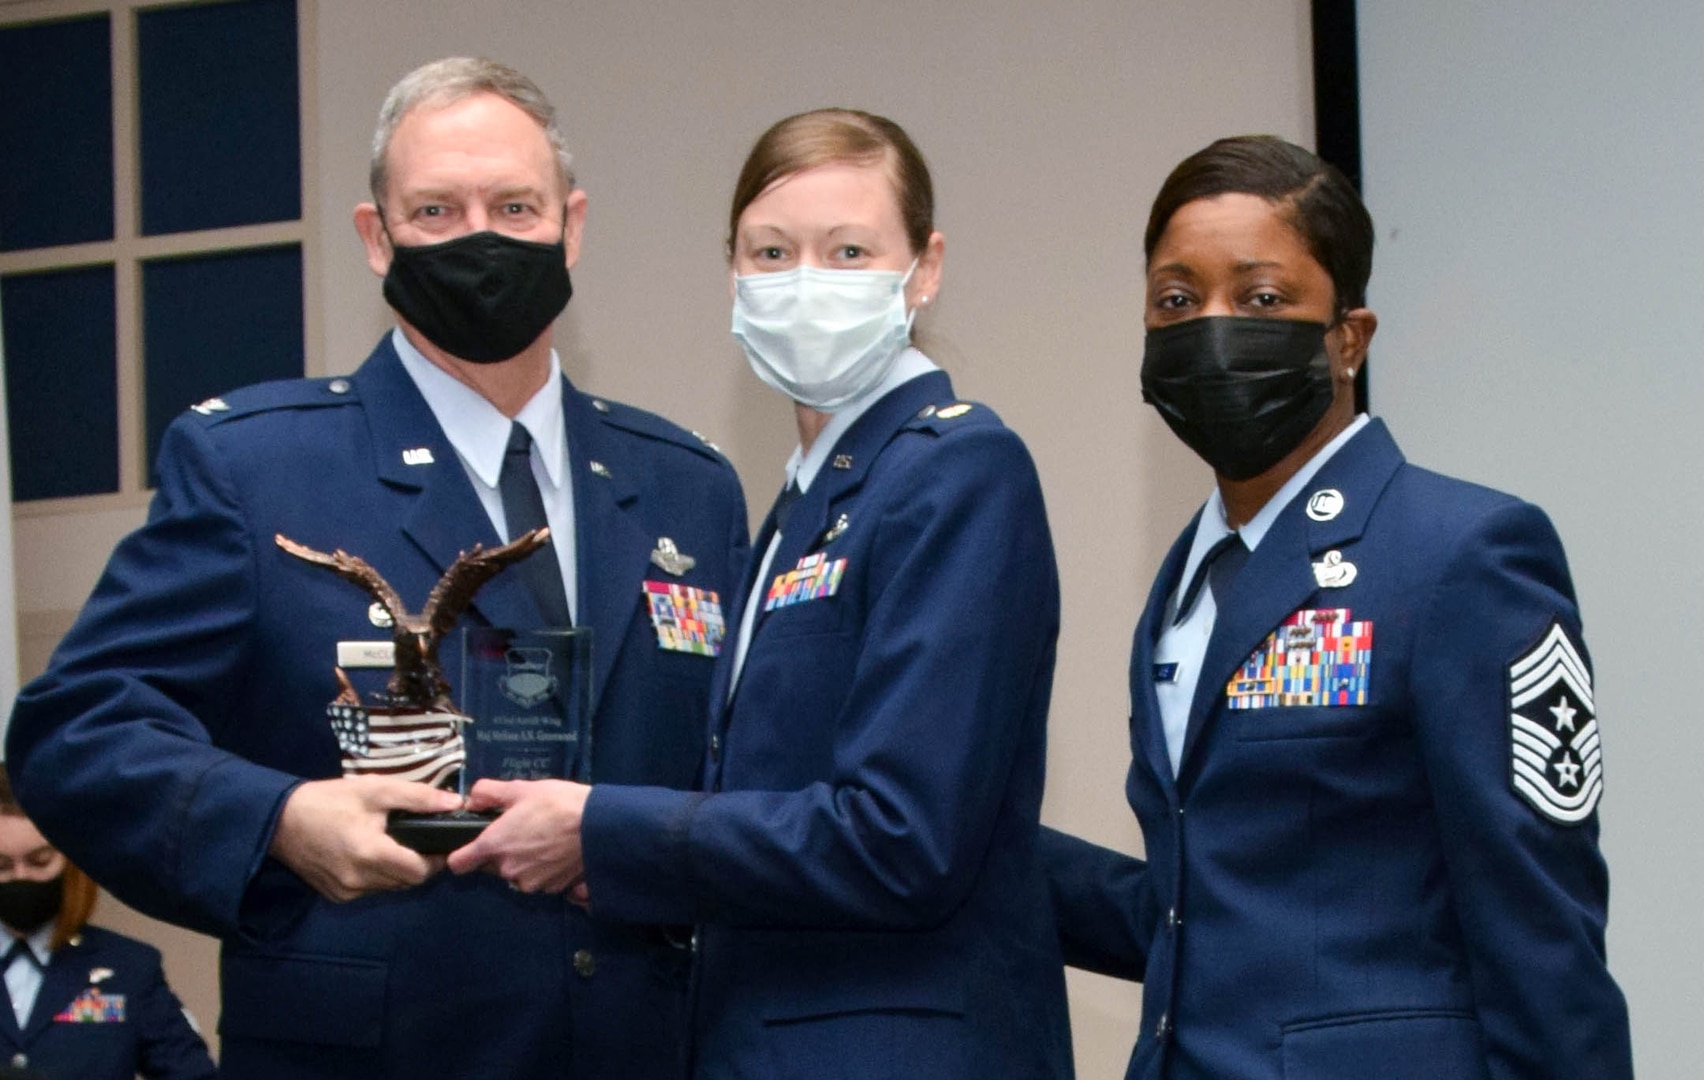 Col. Terry McClain, 433rd Airlift Wing commander, and Chief Master Sgt. Takesha Williams, 433rd AW command chief, present the Flight Commander of the Year award to Maj. Melissa Greenwood, 26th Aerial Port Squadron, at the wing’s annual awards ceremony Feb. 5, 2022, at Joint Base San Antonio-Lackland, Texas. (U.S. Air Force photo by Staff Sgt. Monet Villacorte)